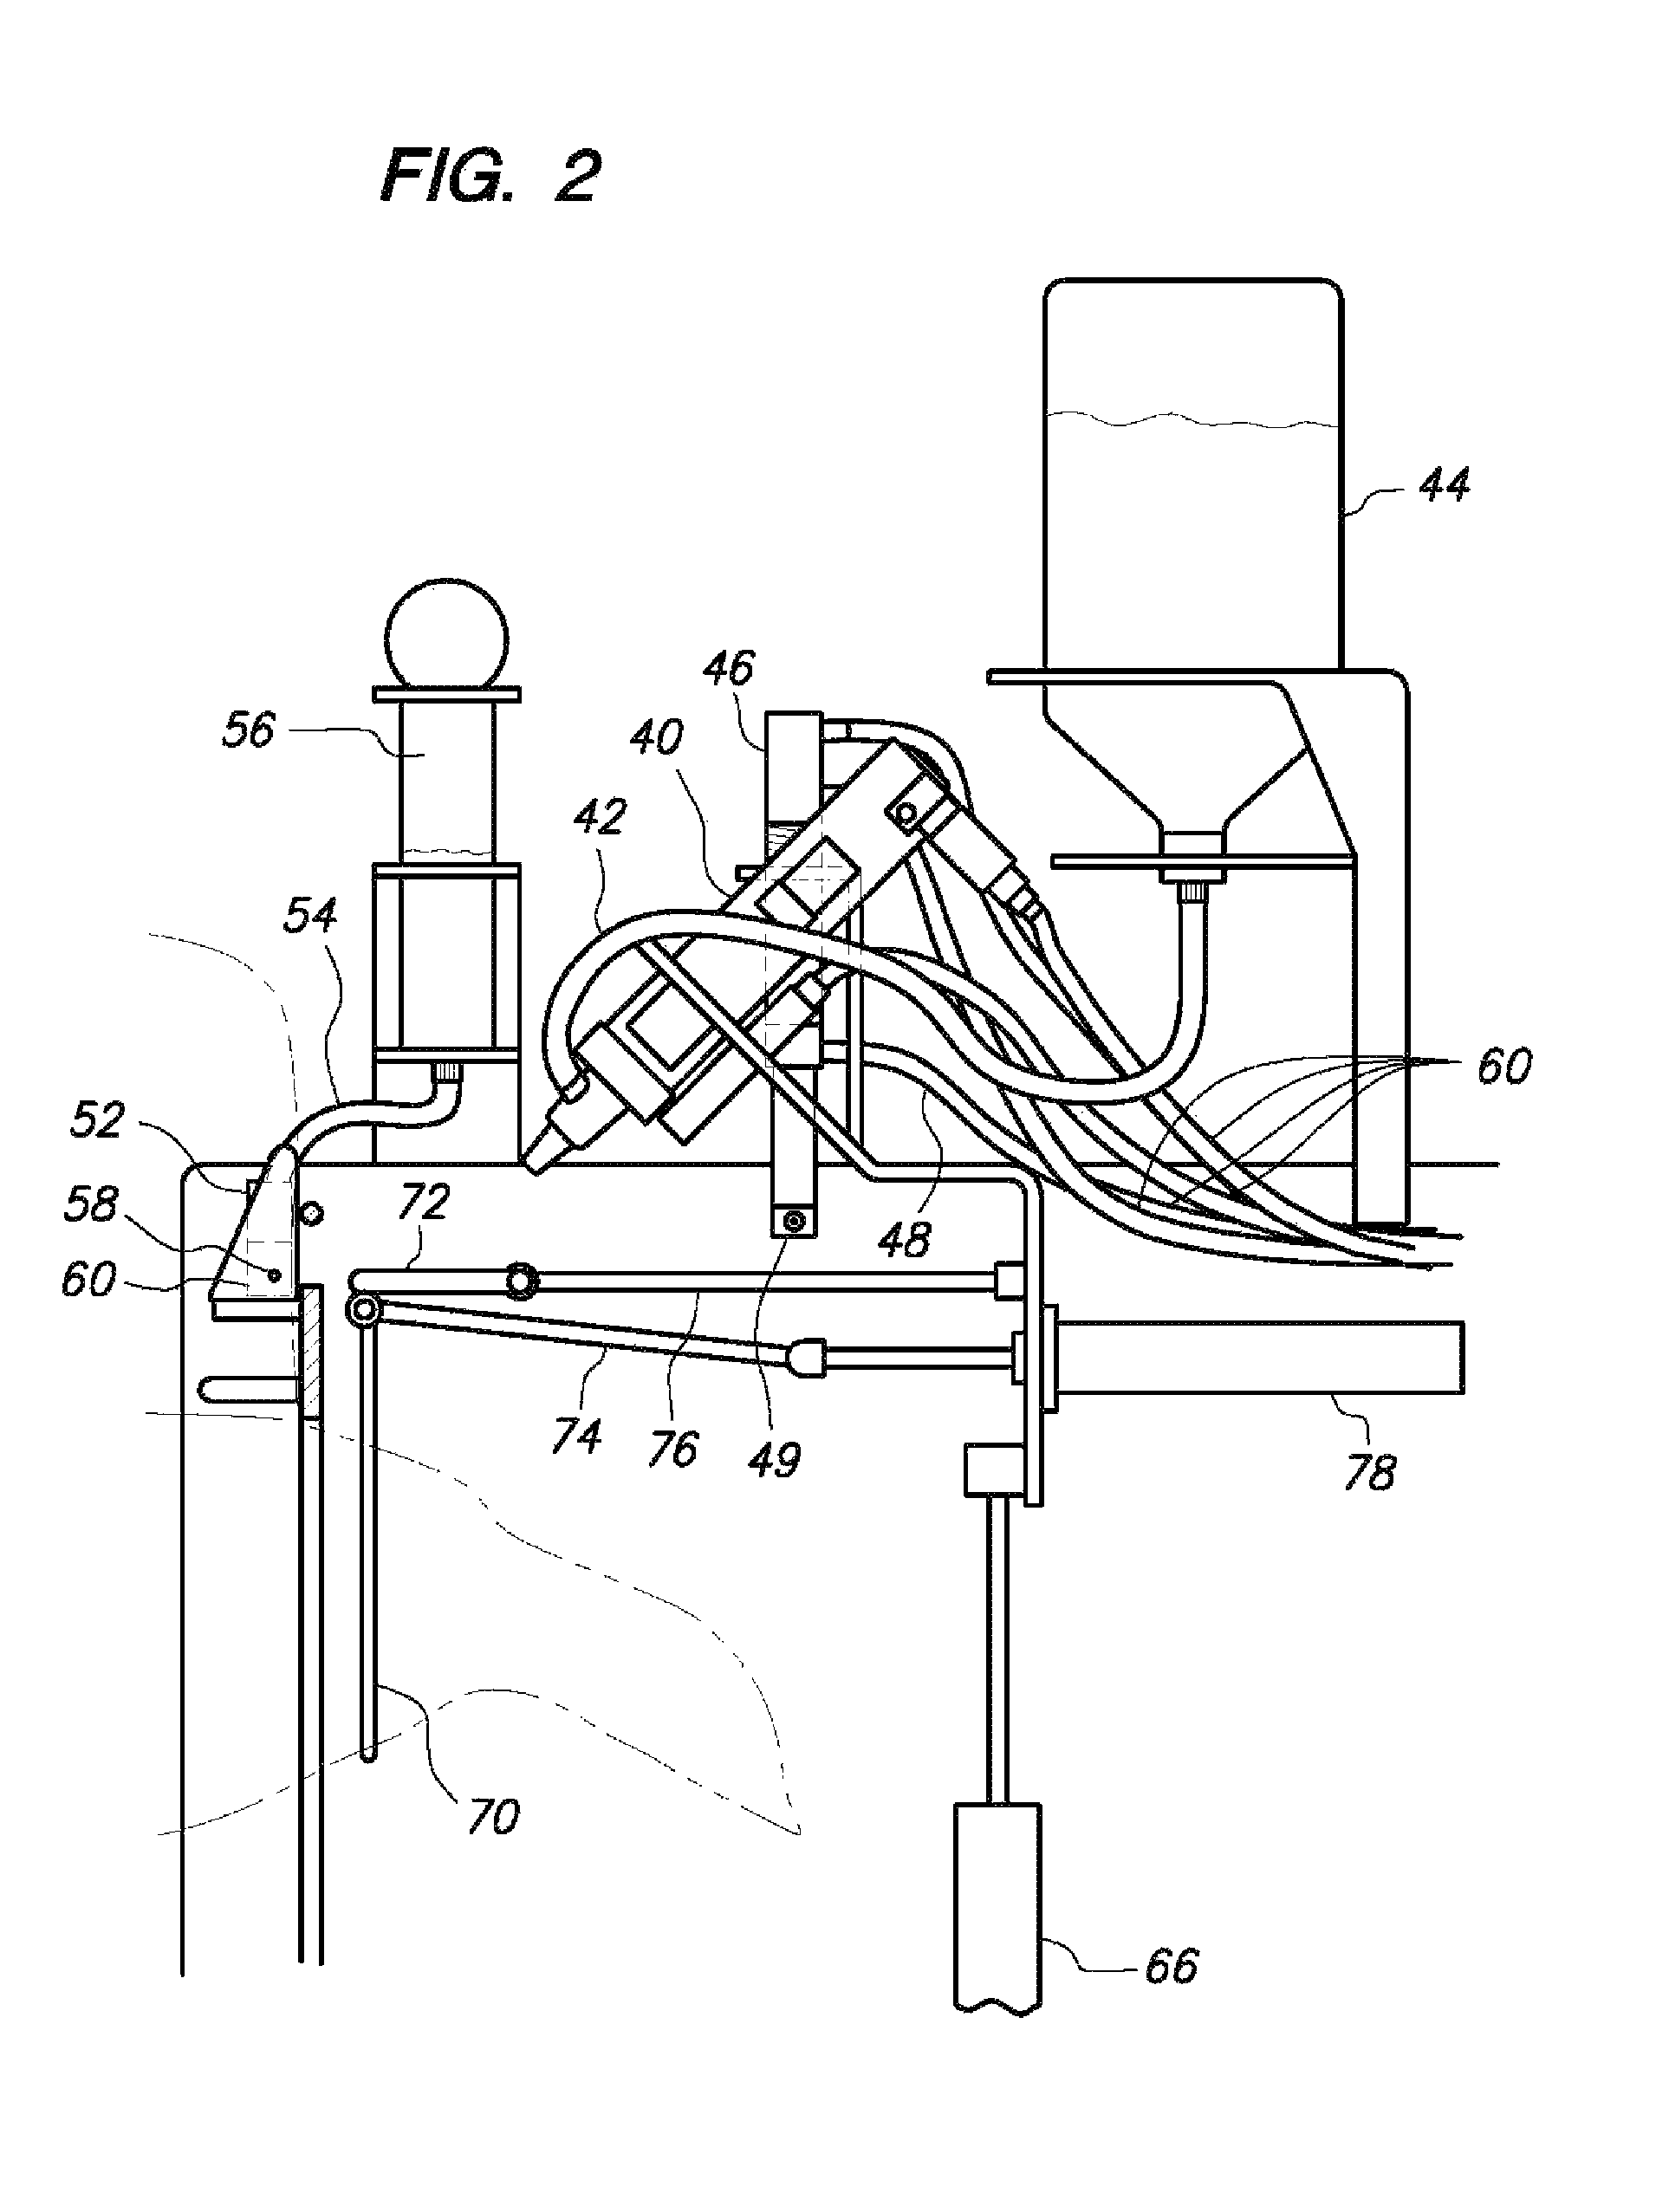 Poultry vaccination apparatus and method